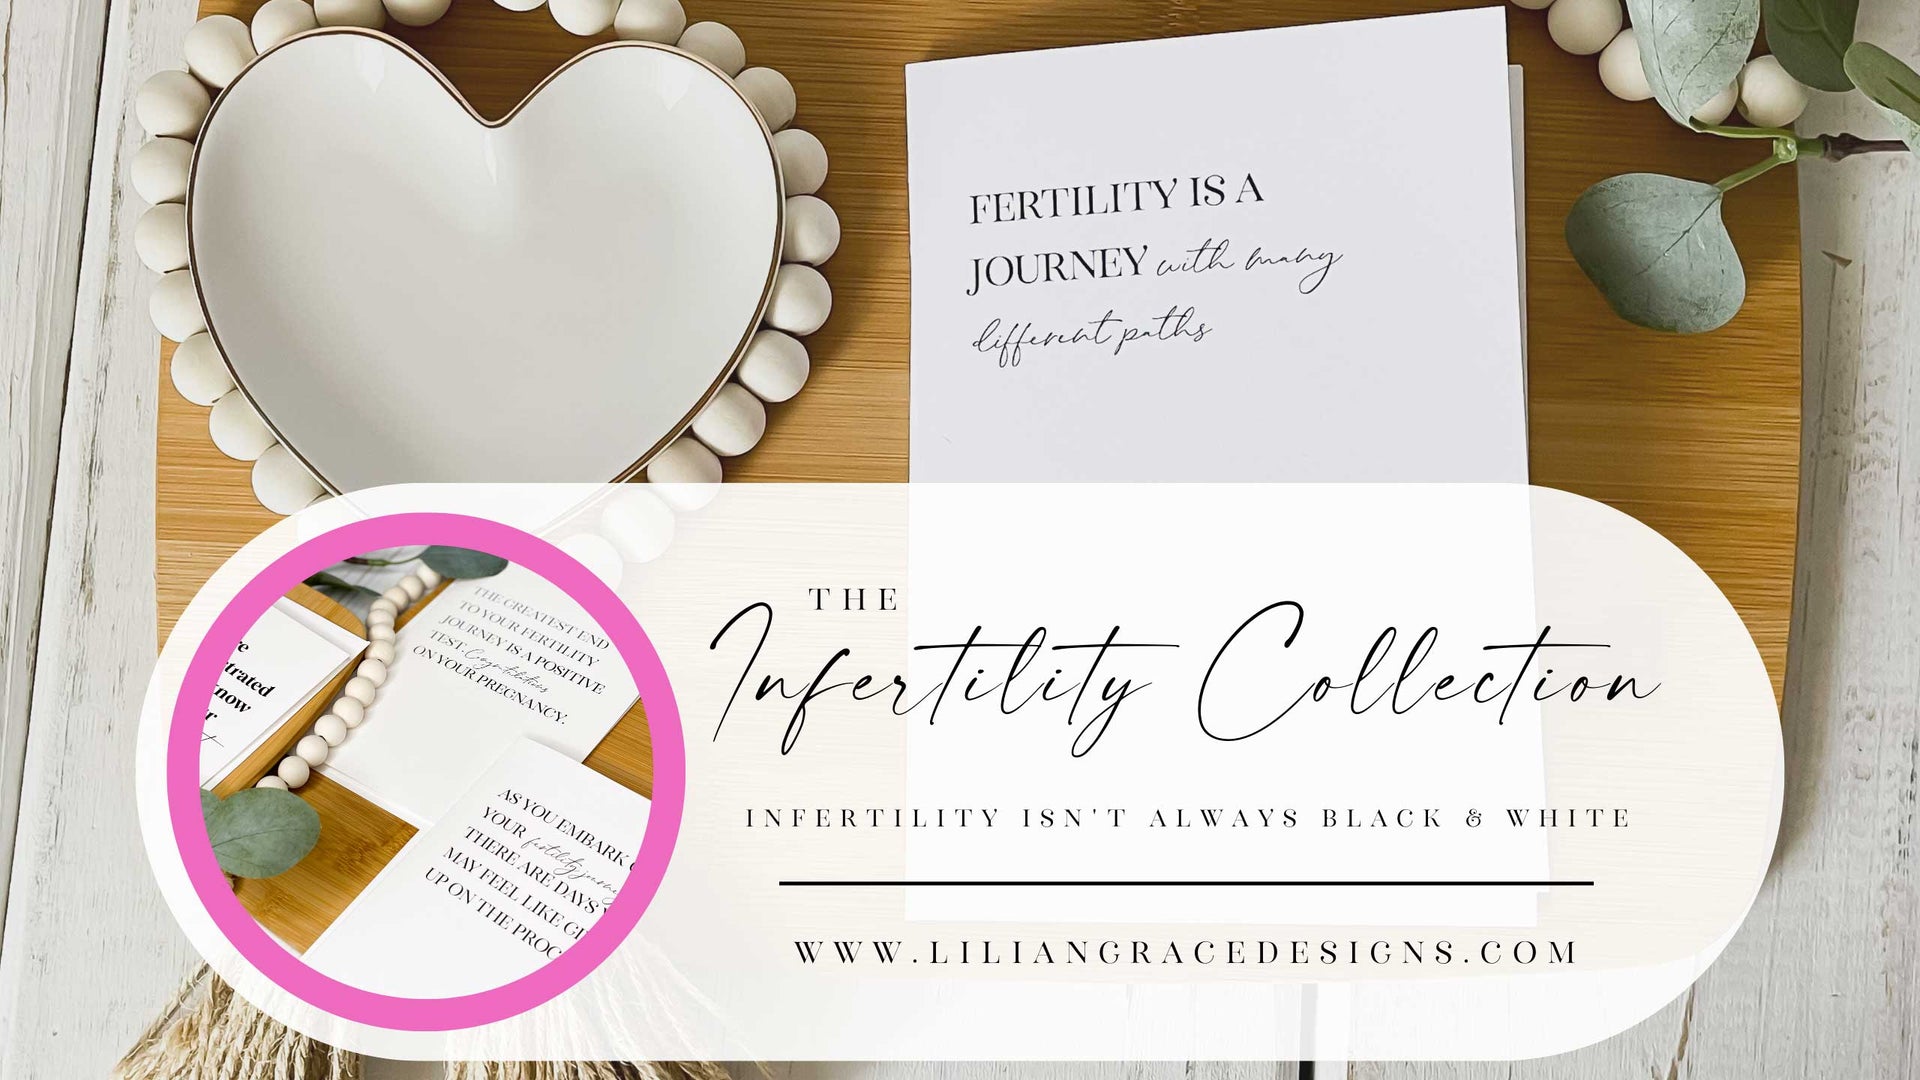 Load video: Lilian Grace Designs, the Infertility Collection